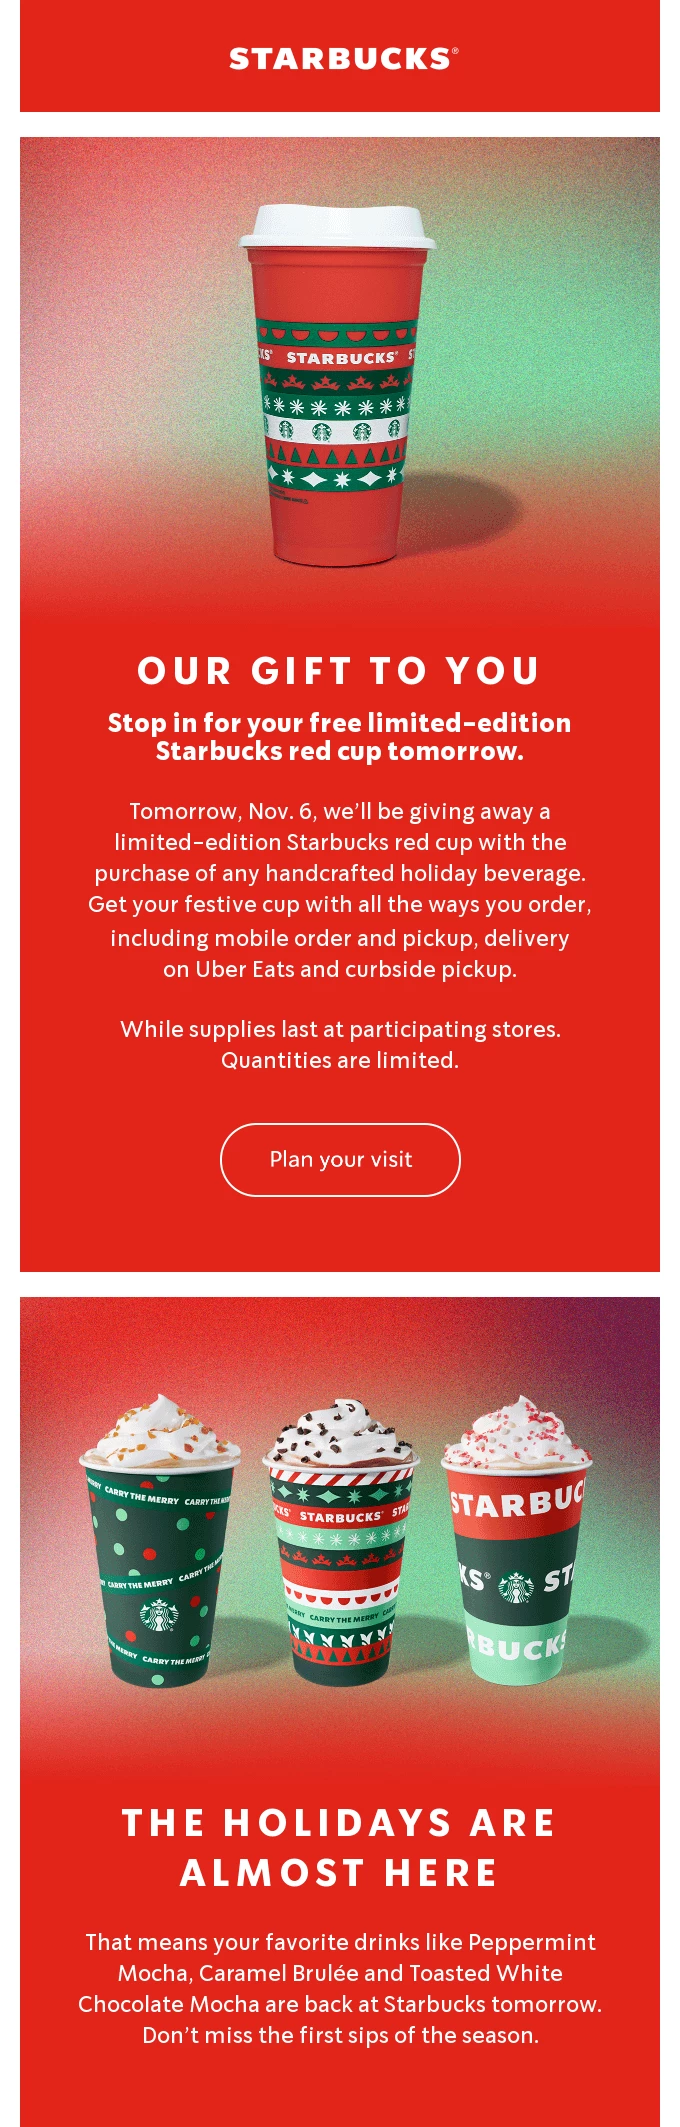 Starbucks Christmas email in red and green colors with festive drink cups